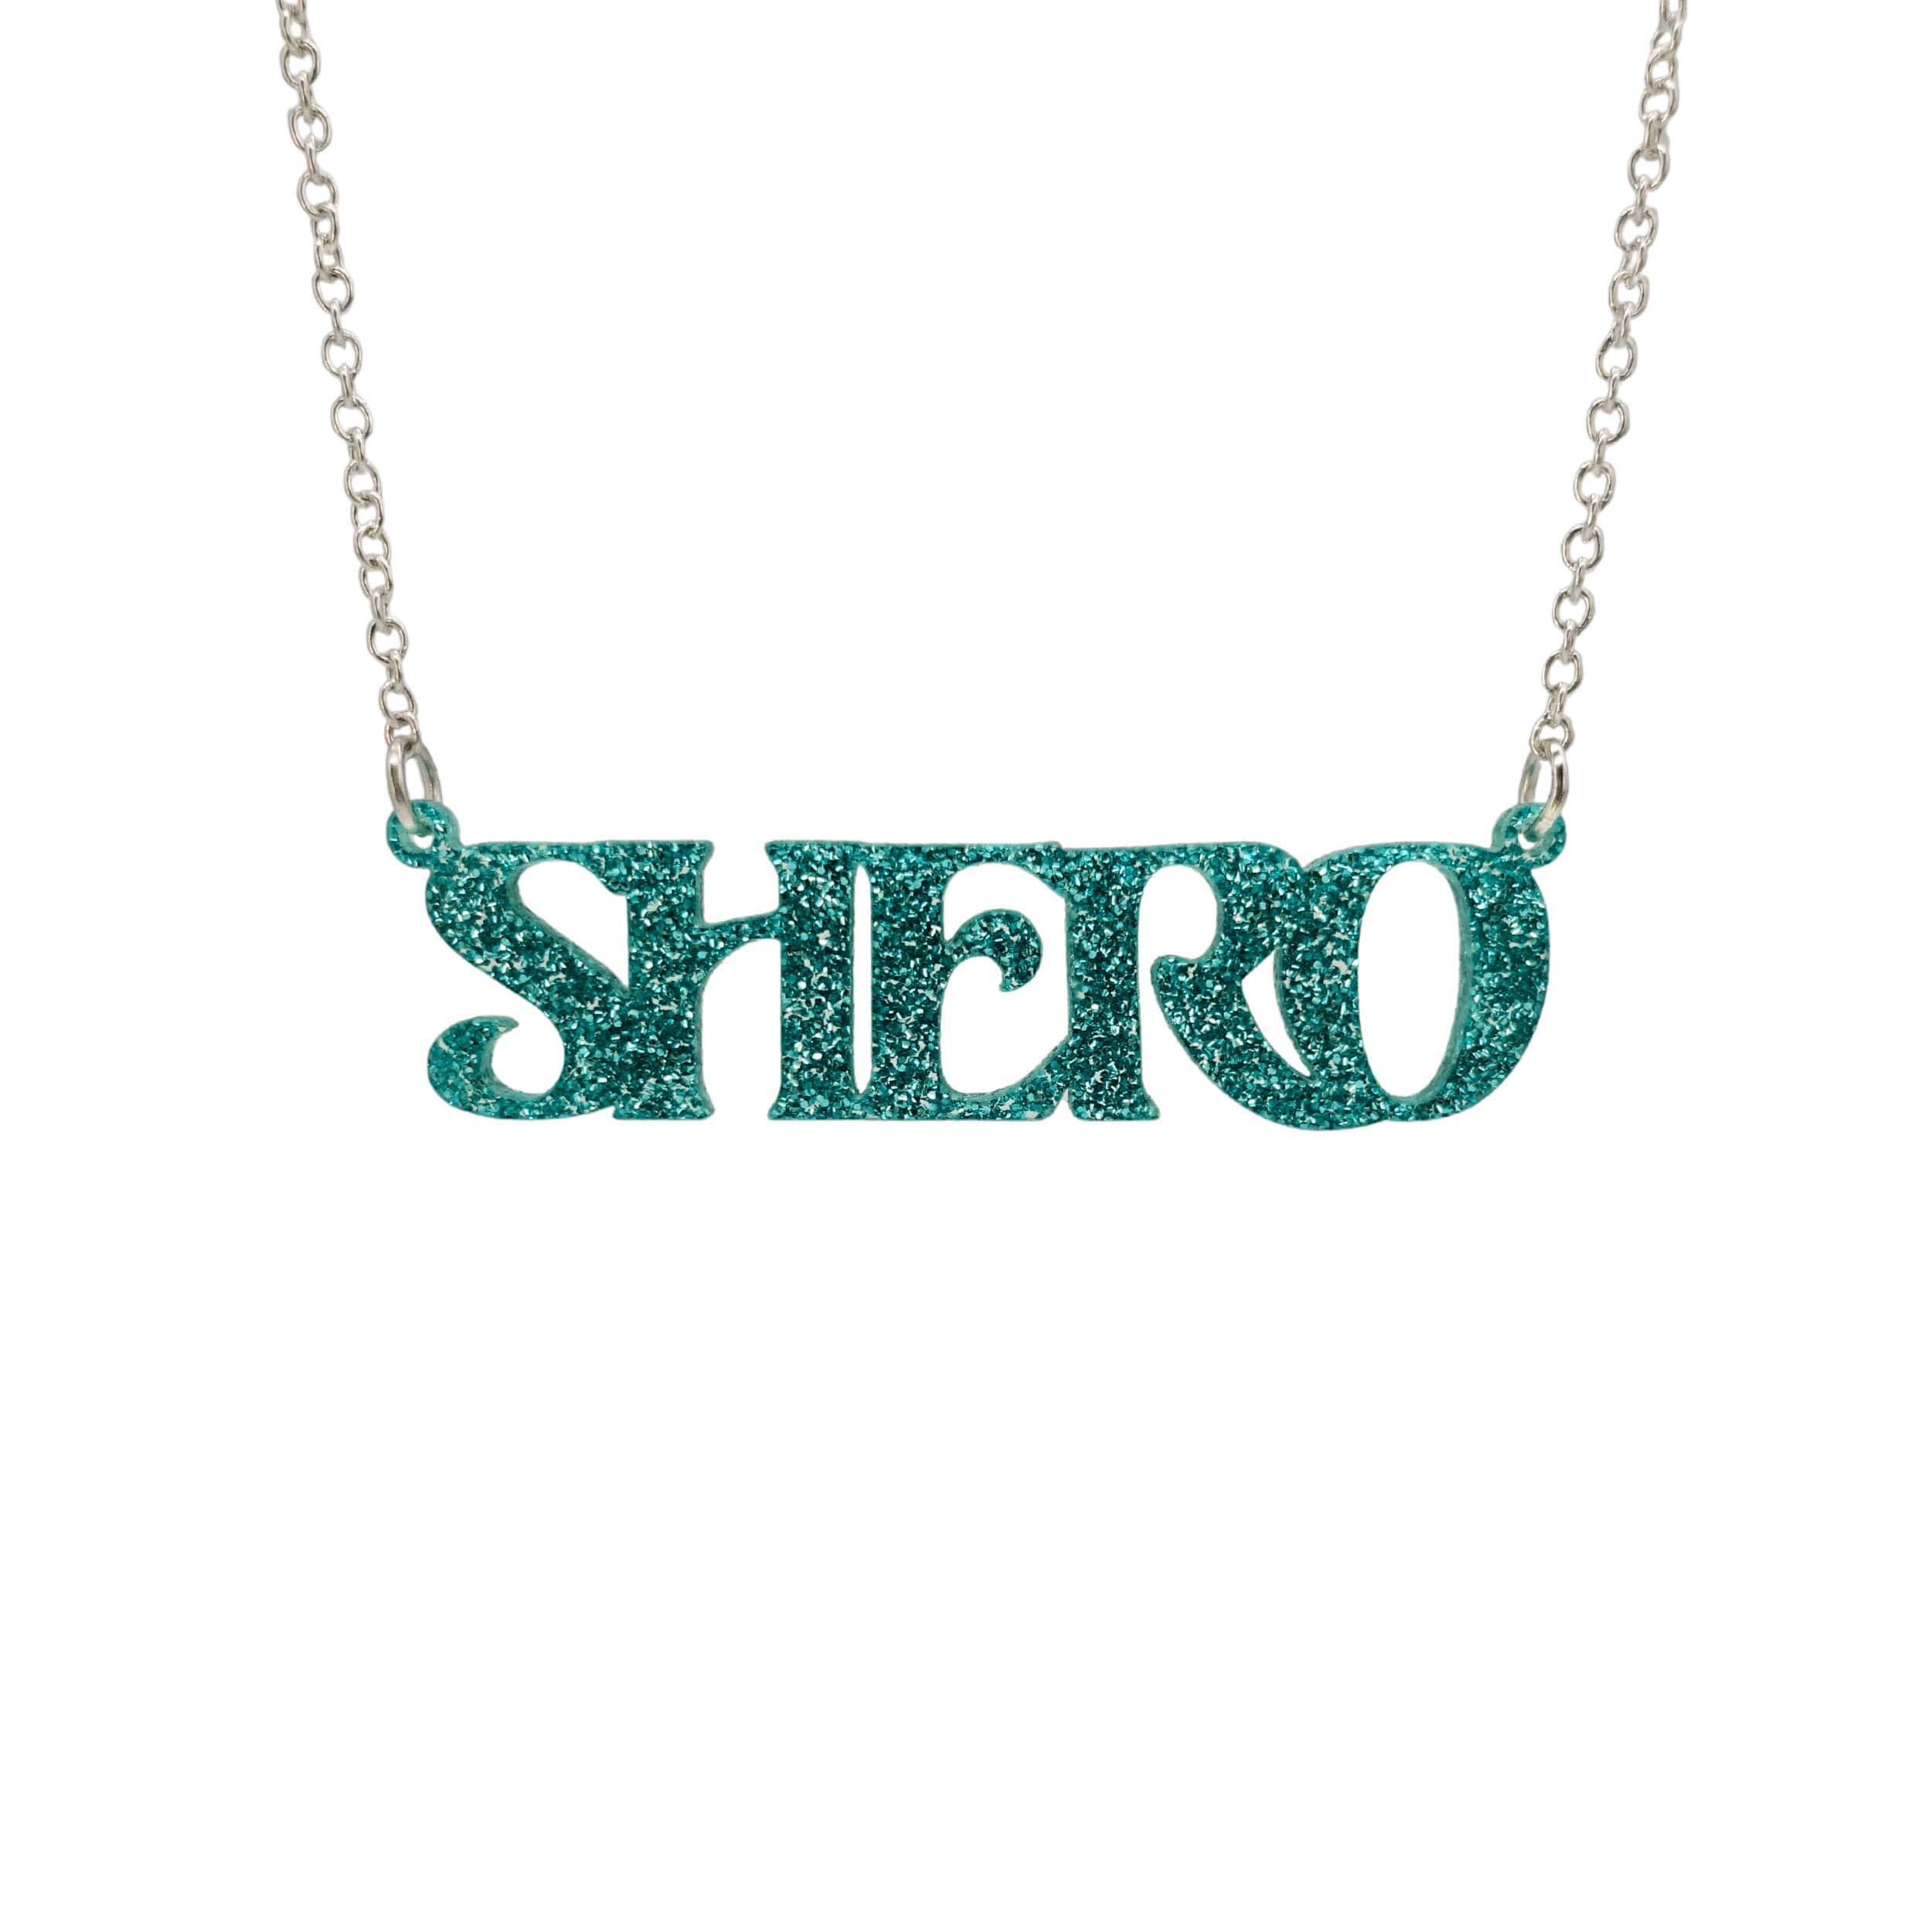 Teal glitter Shero necklace shown in a Wear and Resist gift box. 